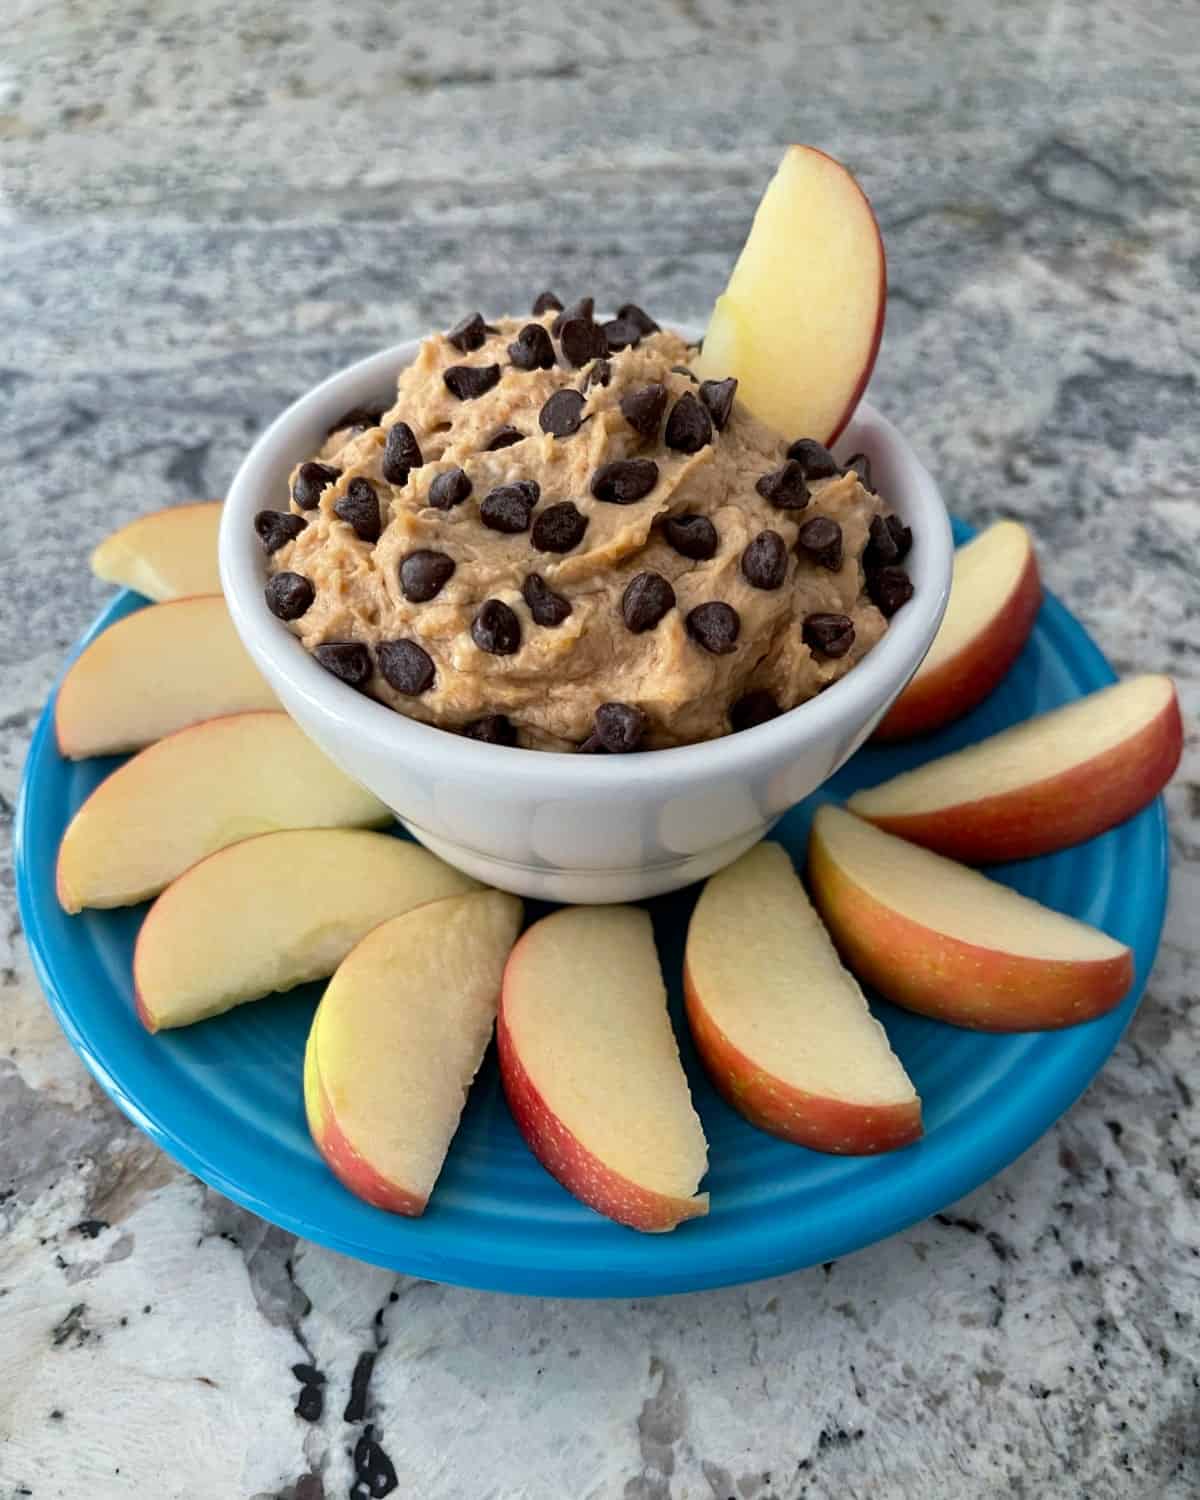 creamy peanut butter dip topped with chocolate chips in white cup surrounded by apple slices on a blue plate 